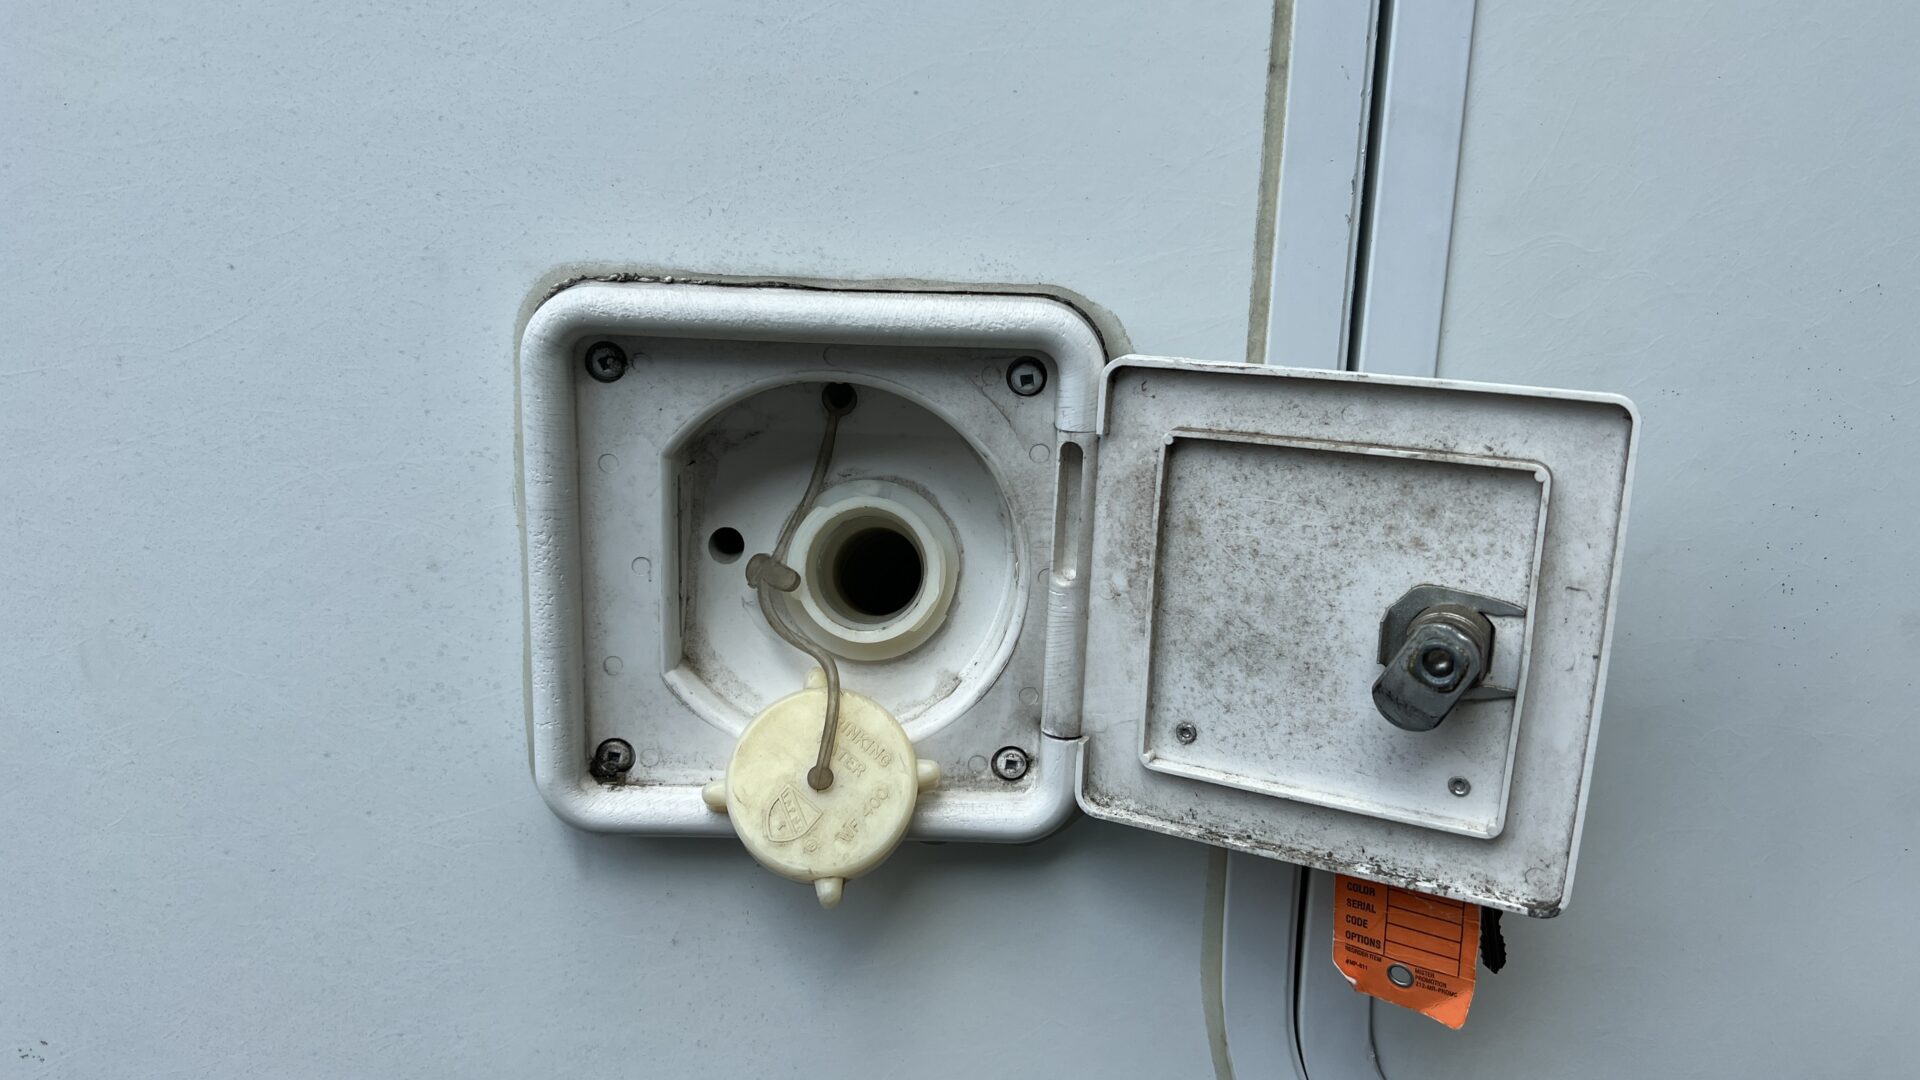 Fresh water tank inlet on side of RV